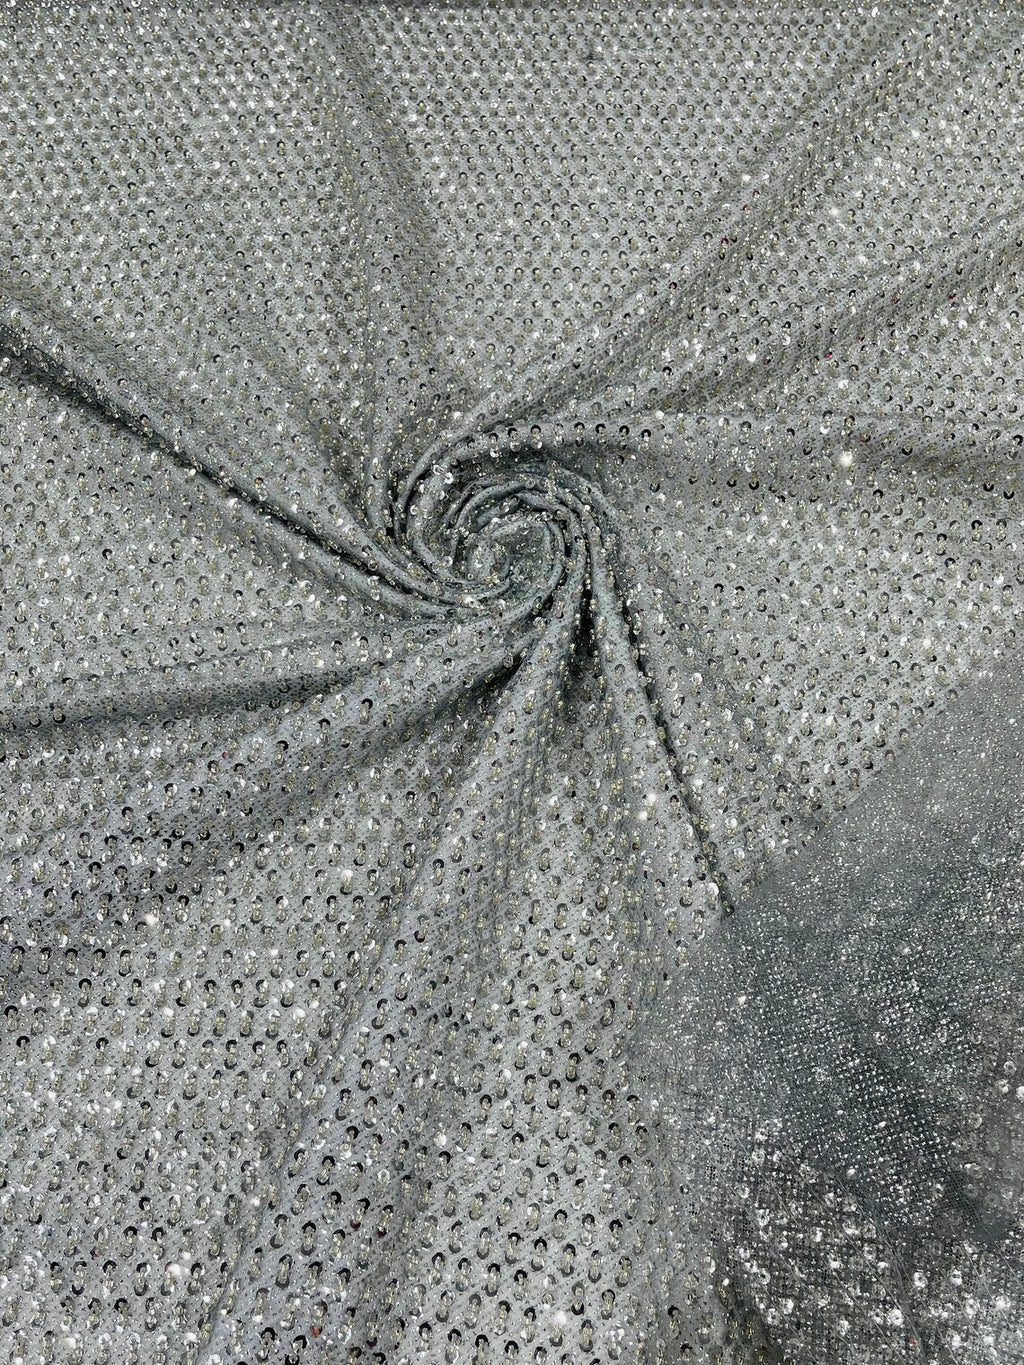 Silver Stretch Mesh w/Silver Sequins Fabric 50 Wide by The Yard